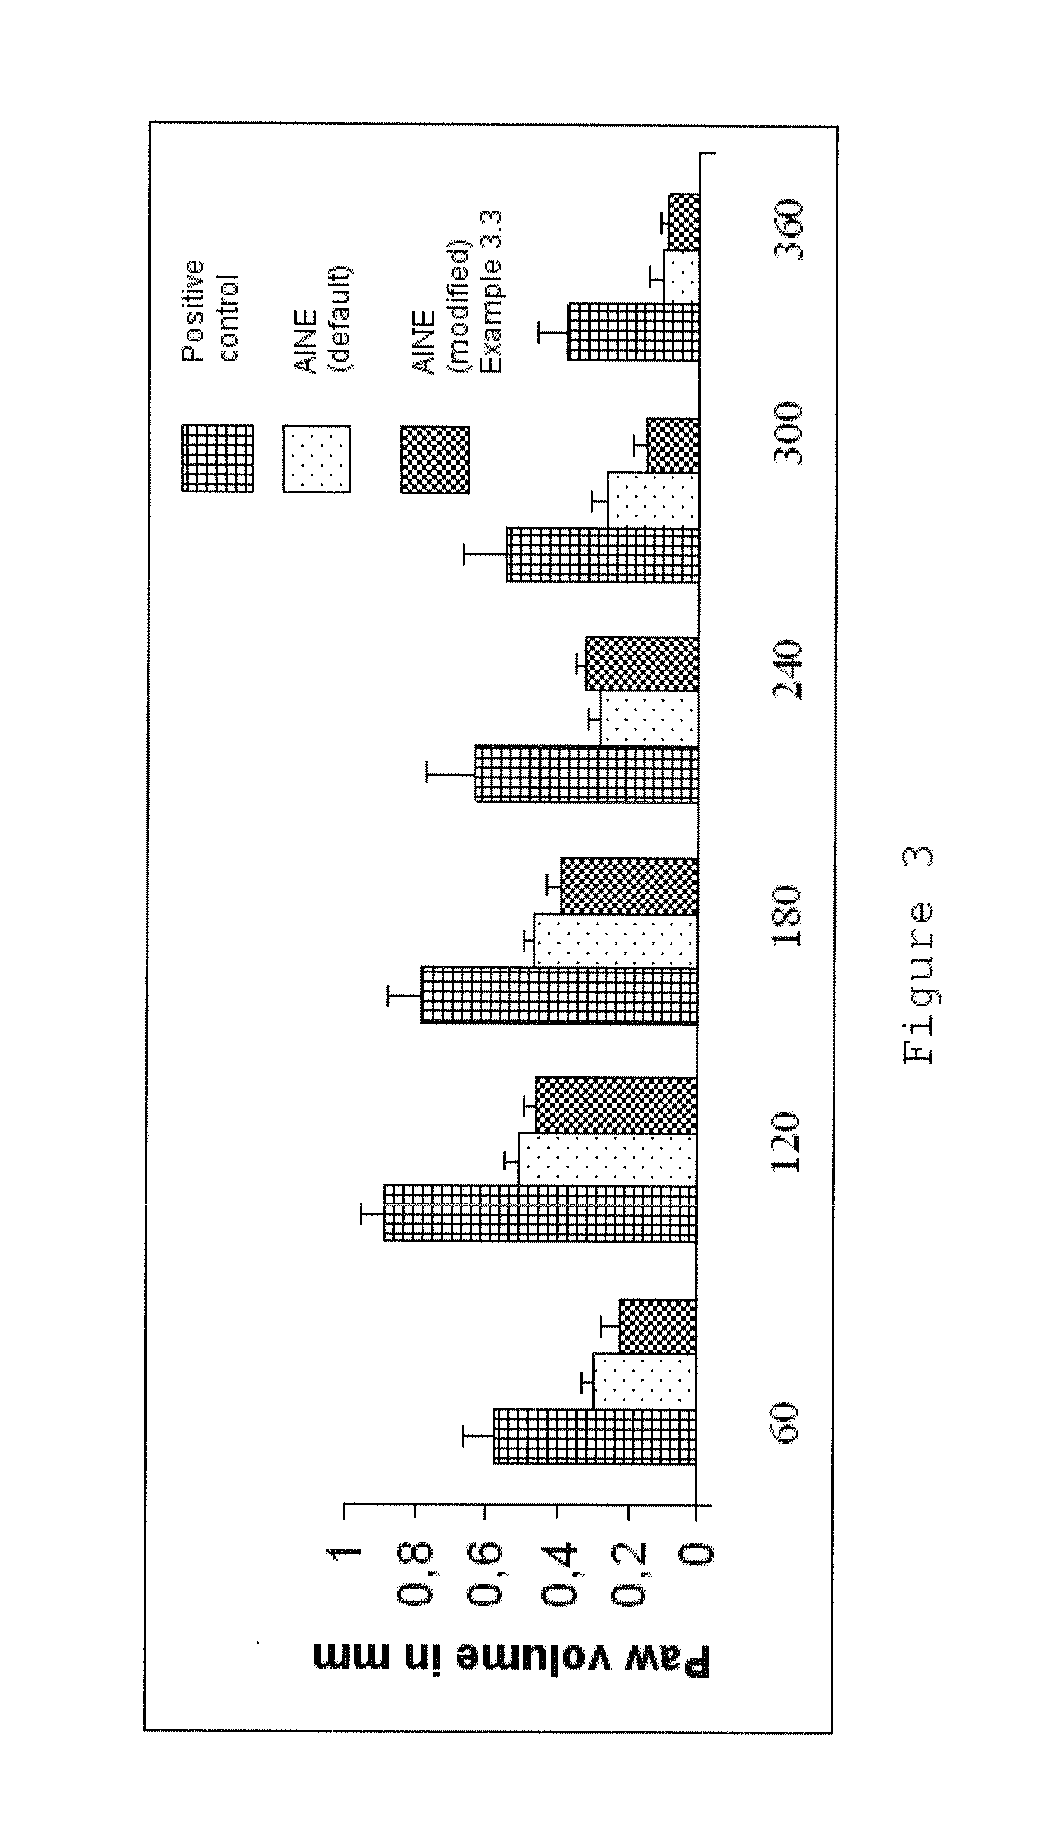 Phthalimide derivatives of non-steroidal Anti-inflammatory compounds and/or tnf-alpha modulators, method for producing same, pharmaceutical compositions containing same and uses thereof for the treatment of inflammatory diseases